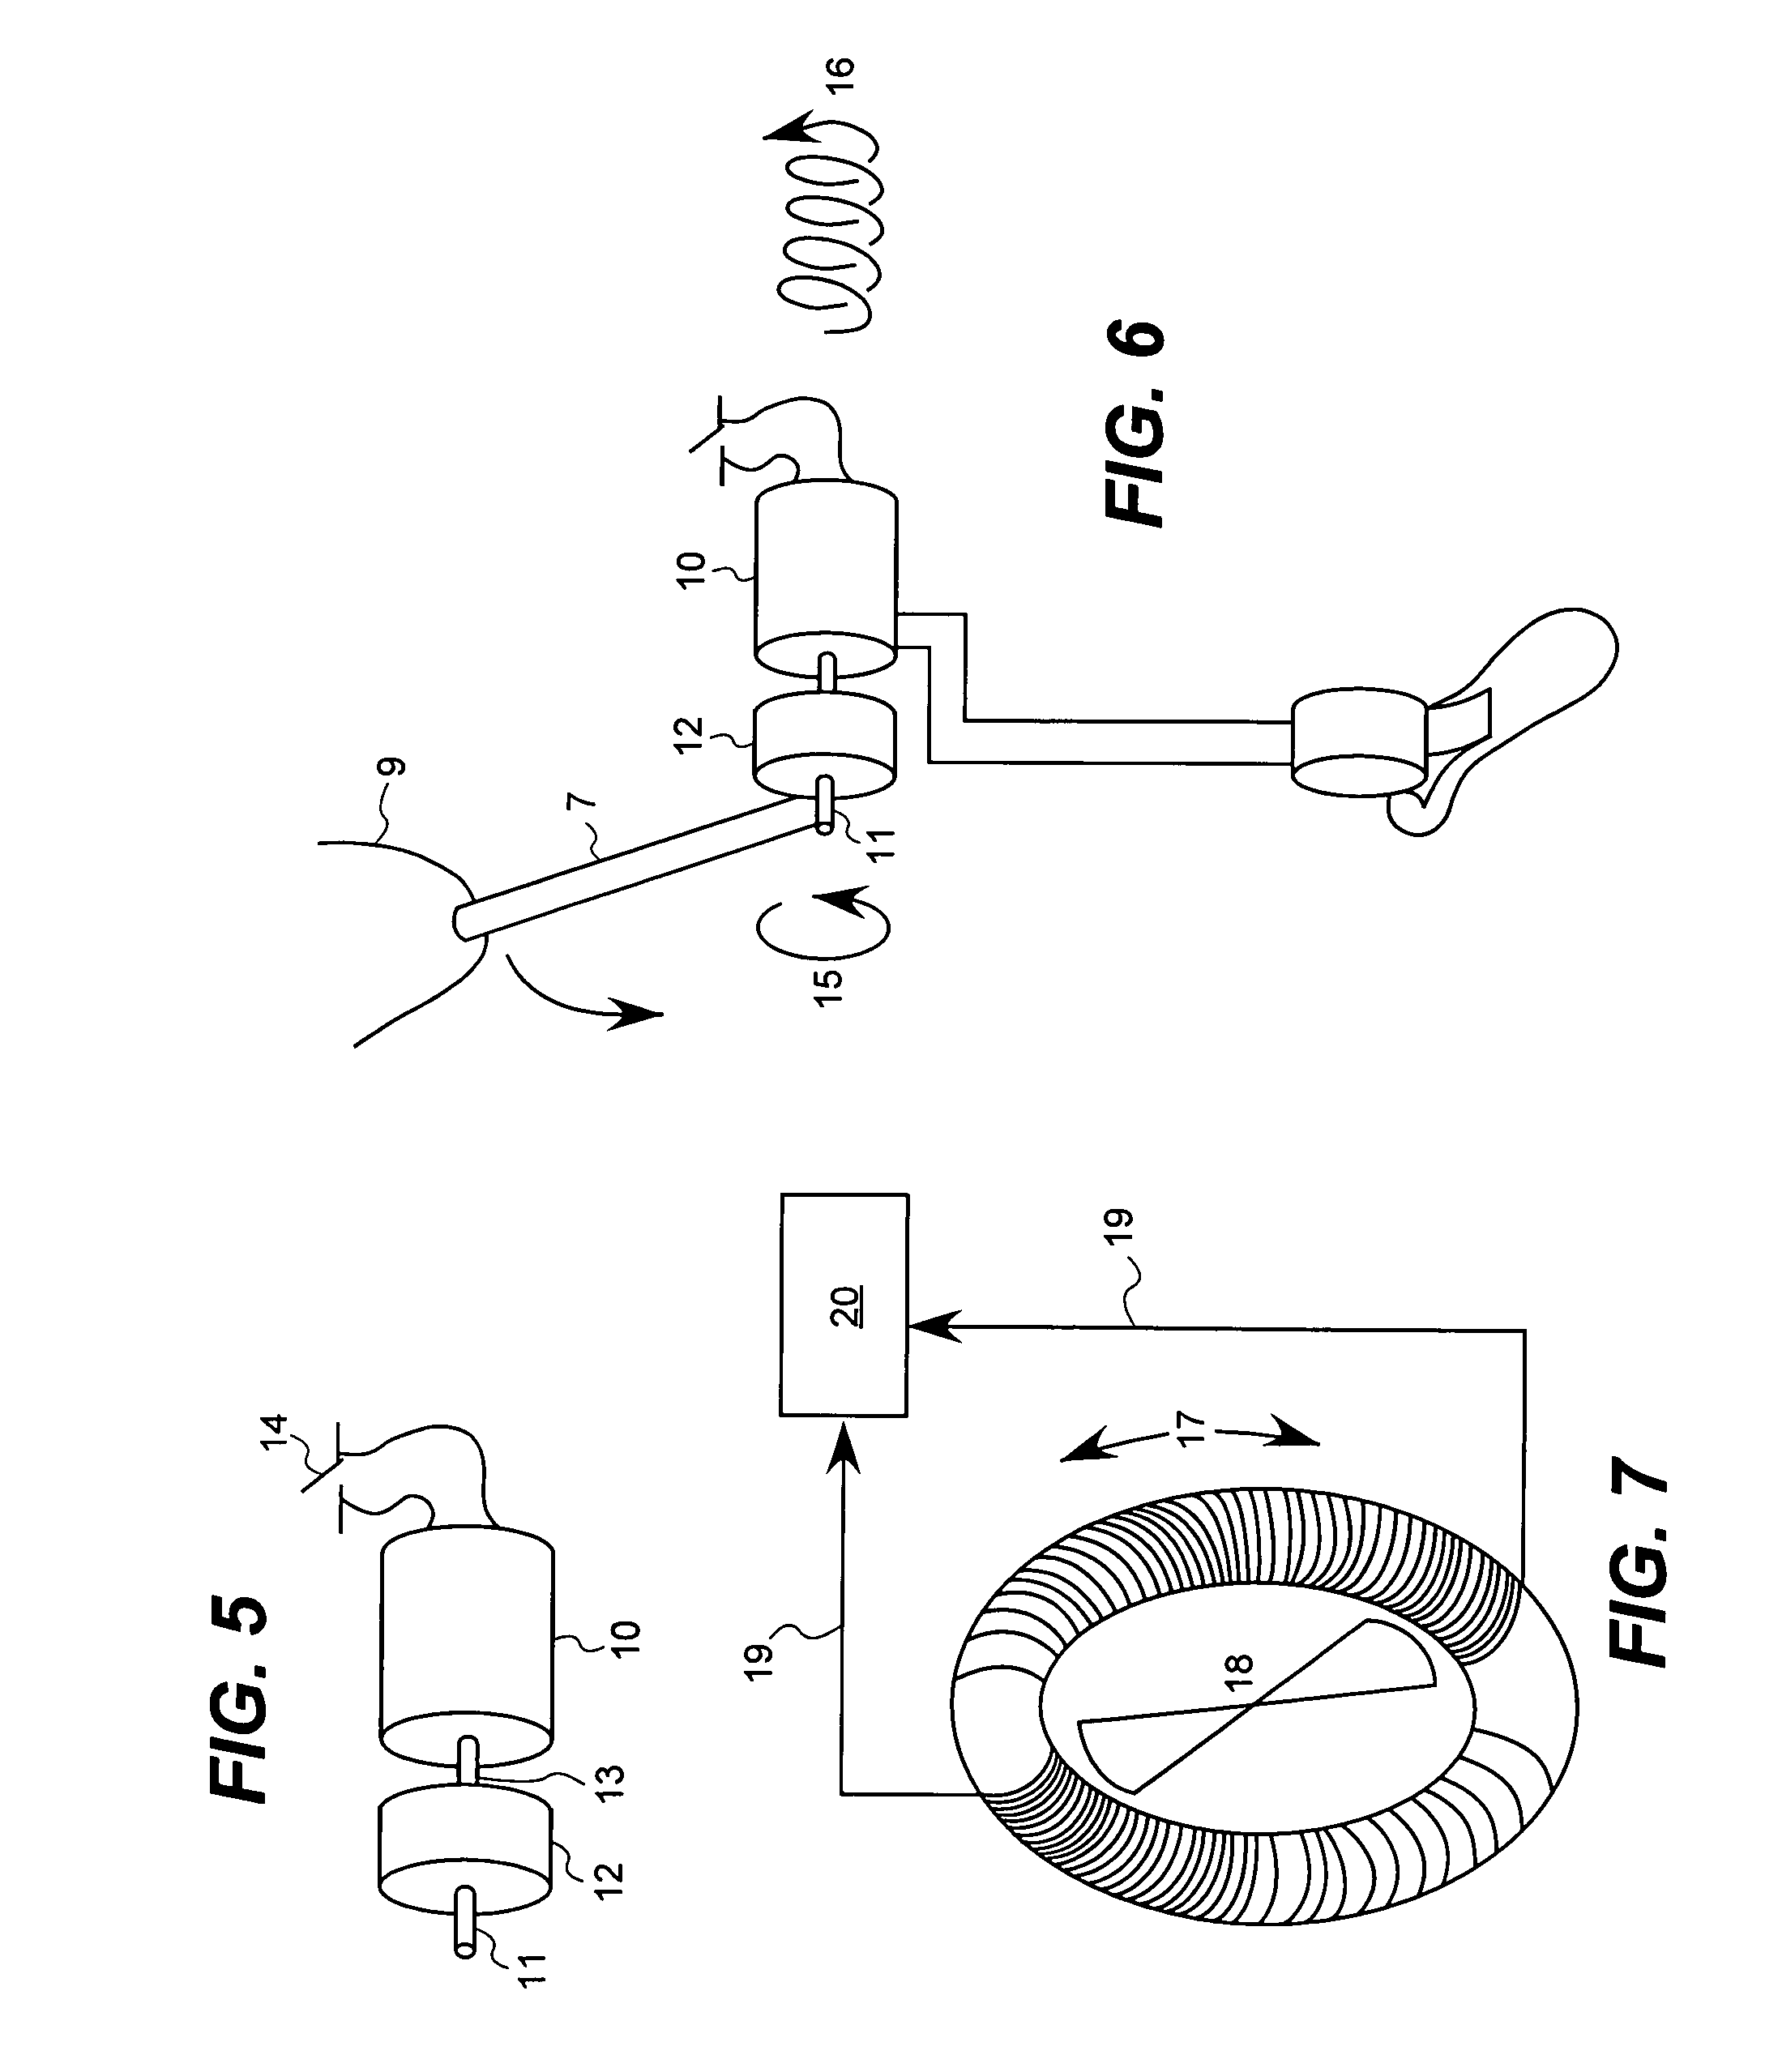 Passive electro-magnetically damped joint